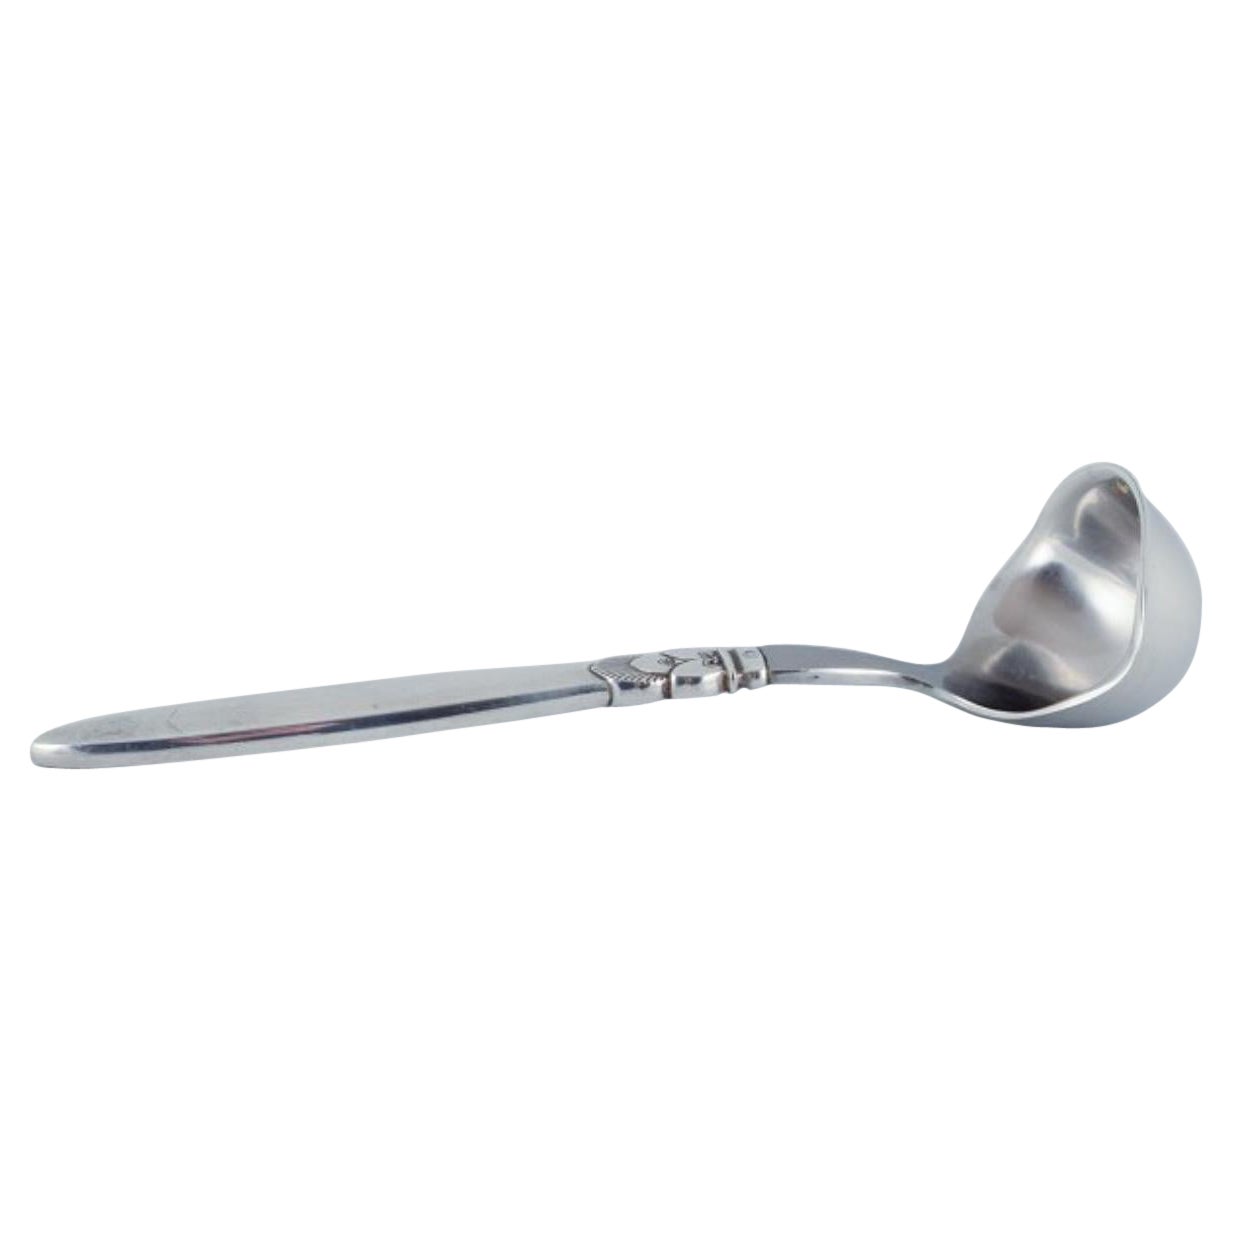 Georg Jensen, Cactus, sterling silver and stainless steel sauce spoon